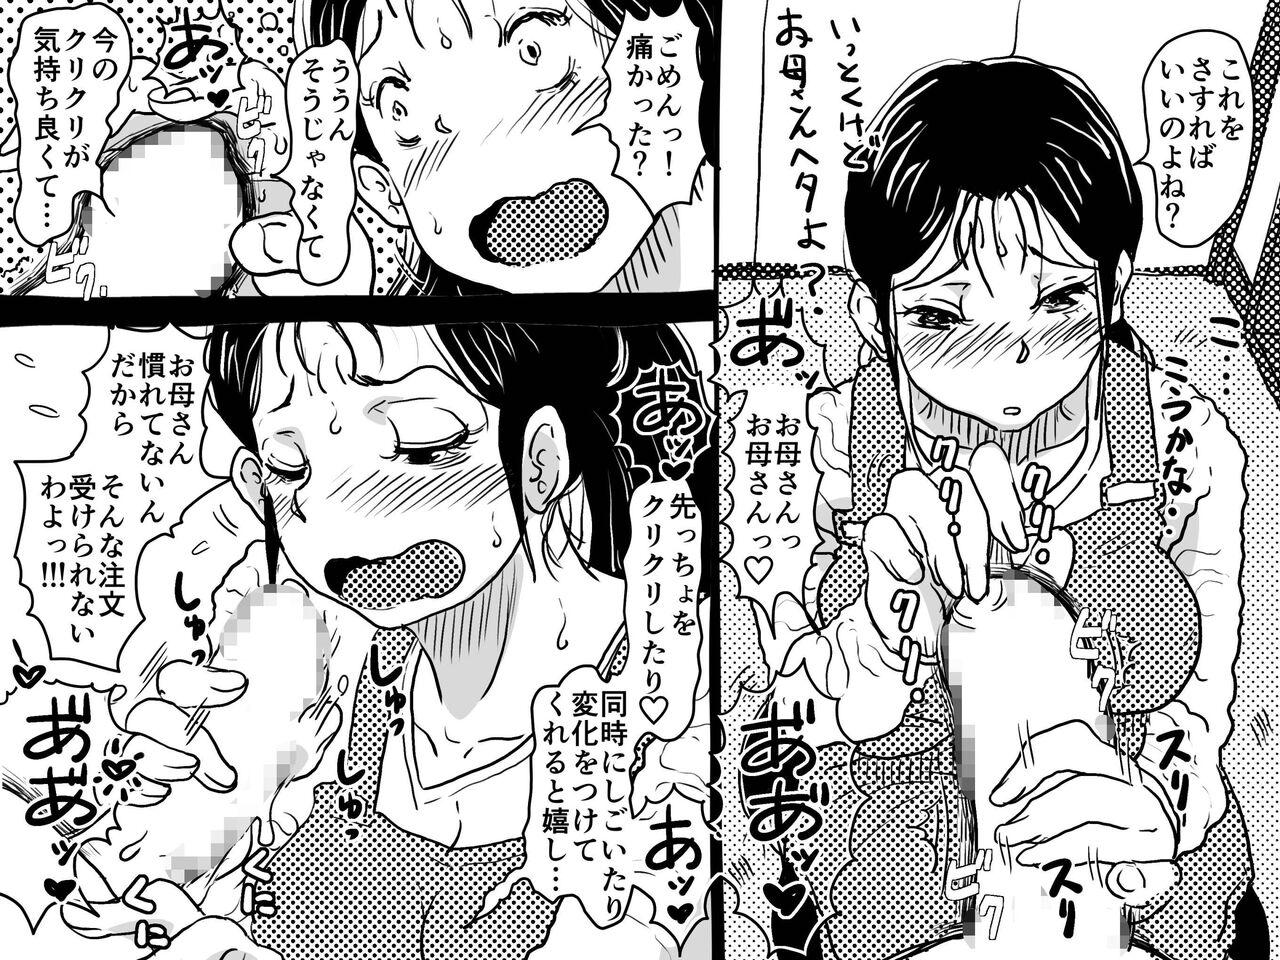 Officesex 「禁断の愛 母子交尾の鎮魂歌」 Verification - Page 11